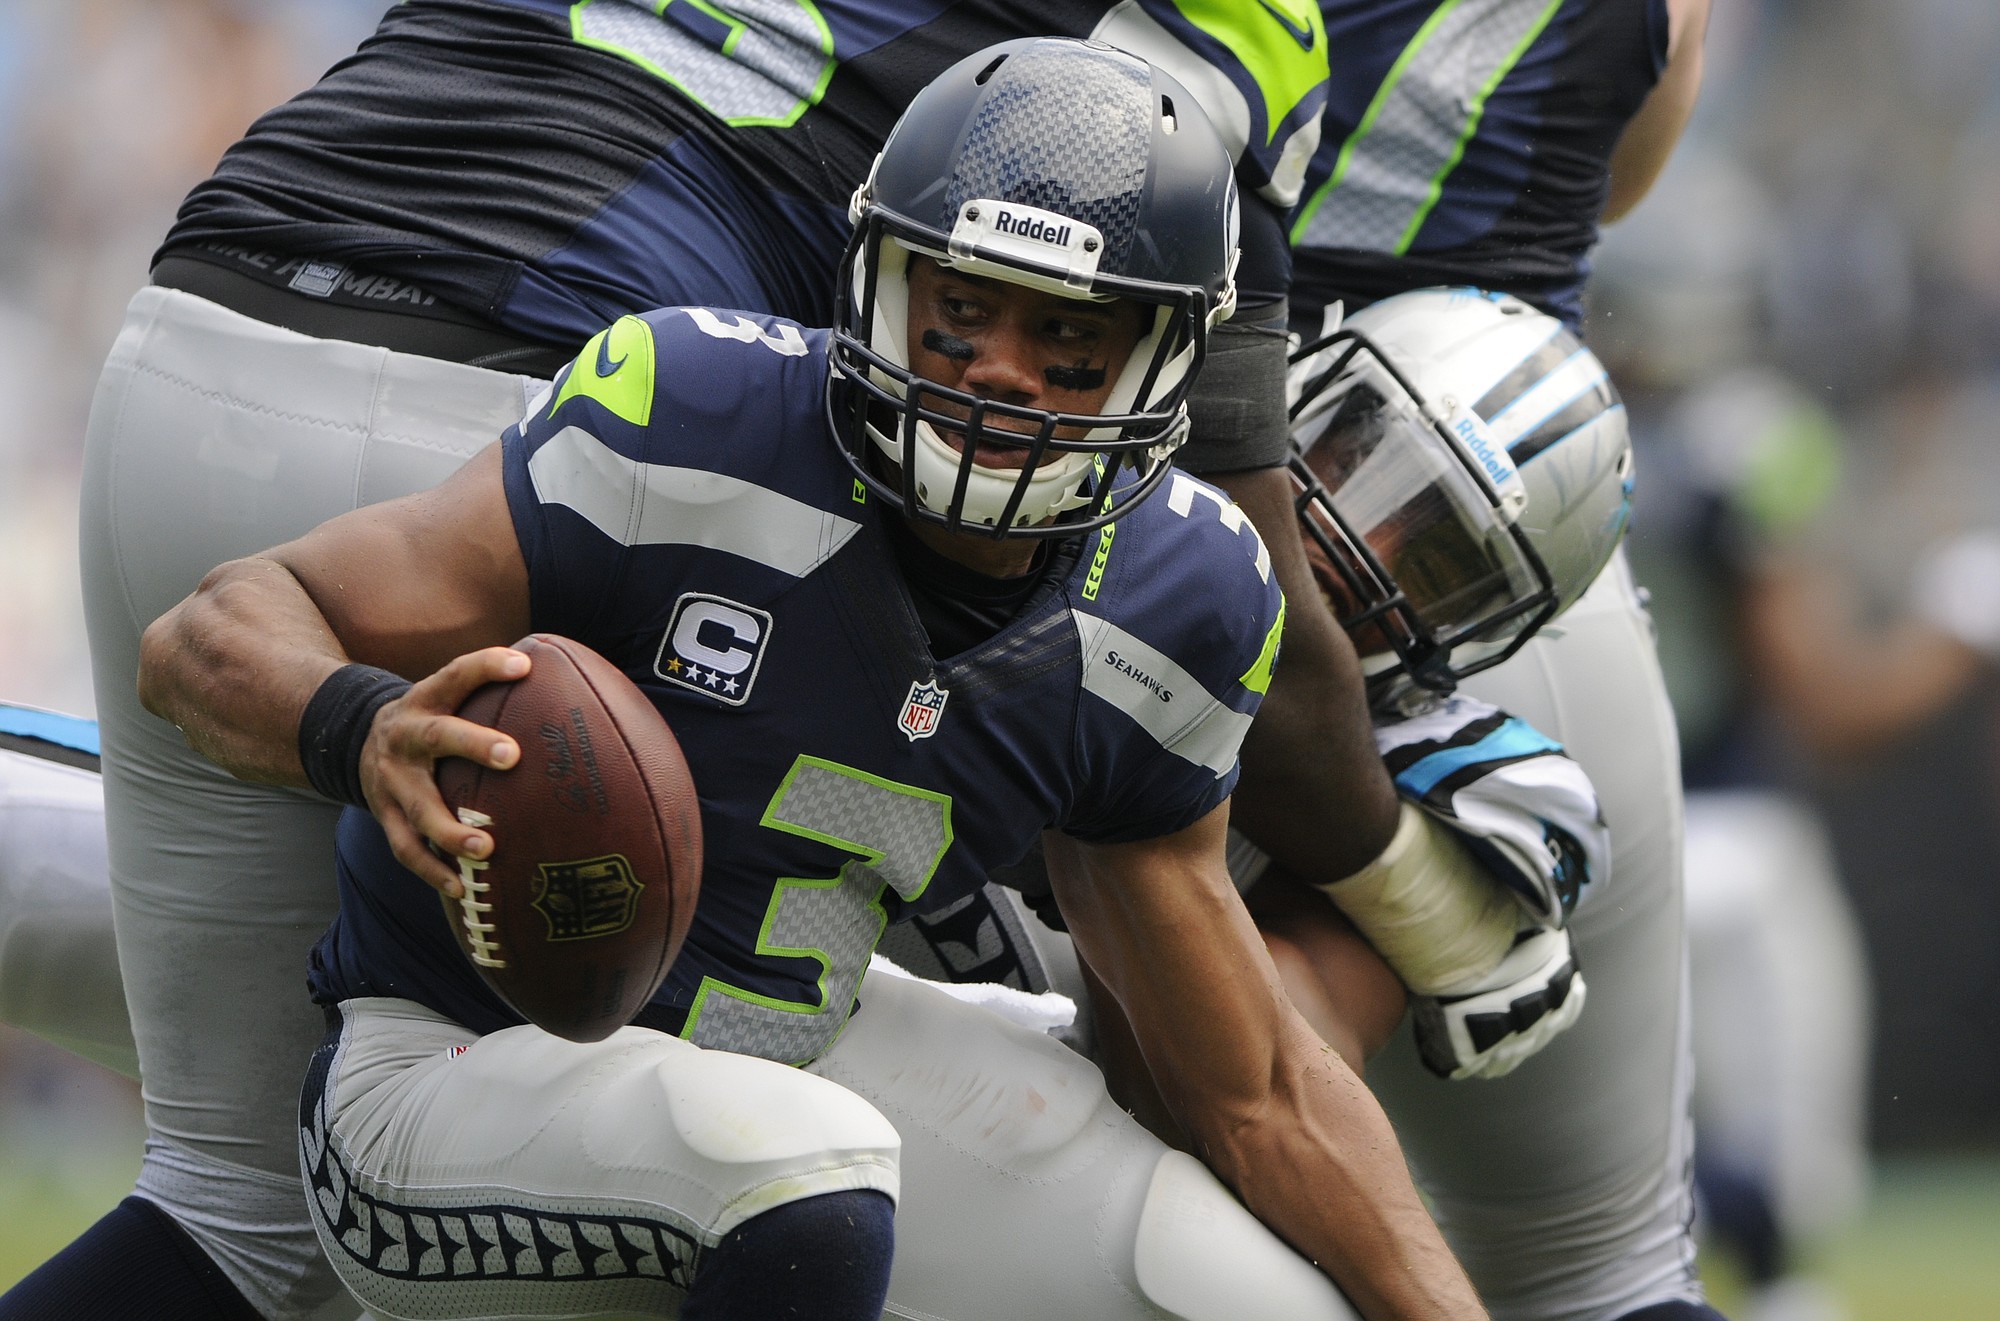 Seattle Seahawks quarterback Russell Wilson (3) scrambles away from a Carolina Panthers player during the second half of an NFL football game in Charlotte, N.C., Sunday, Sept. 8, 2013.